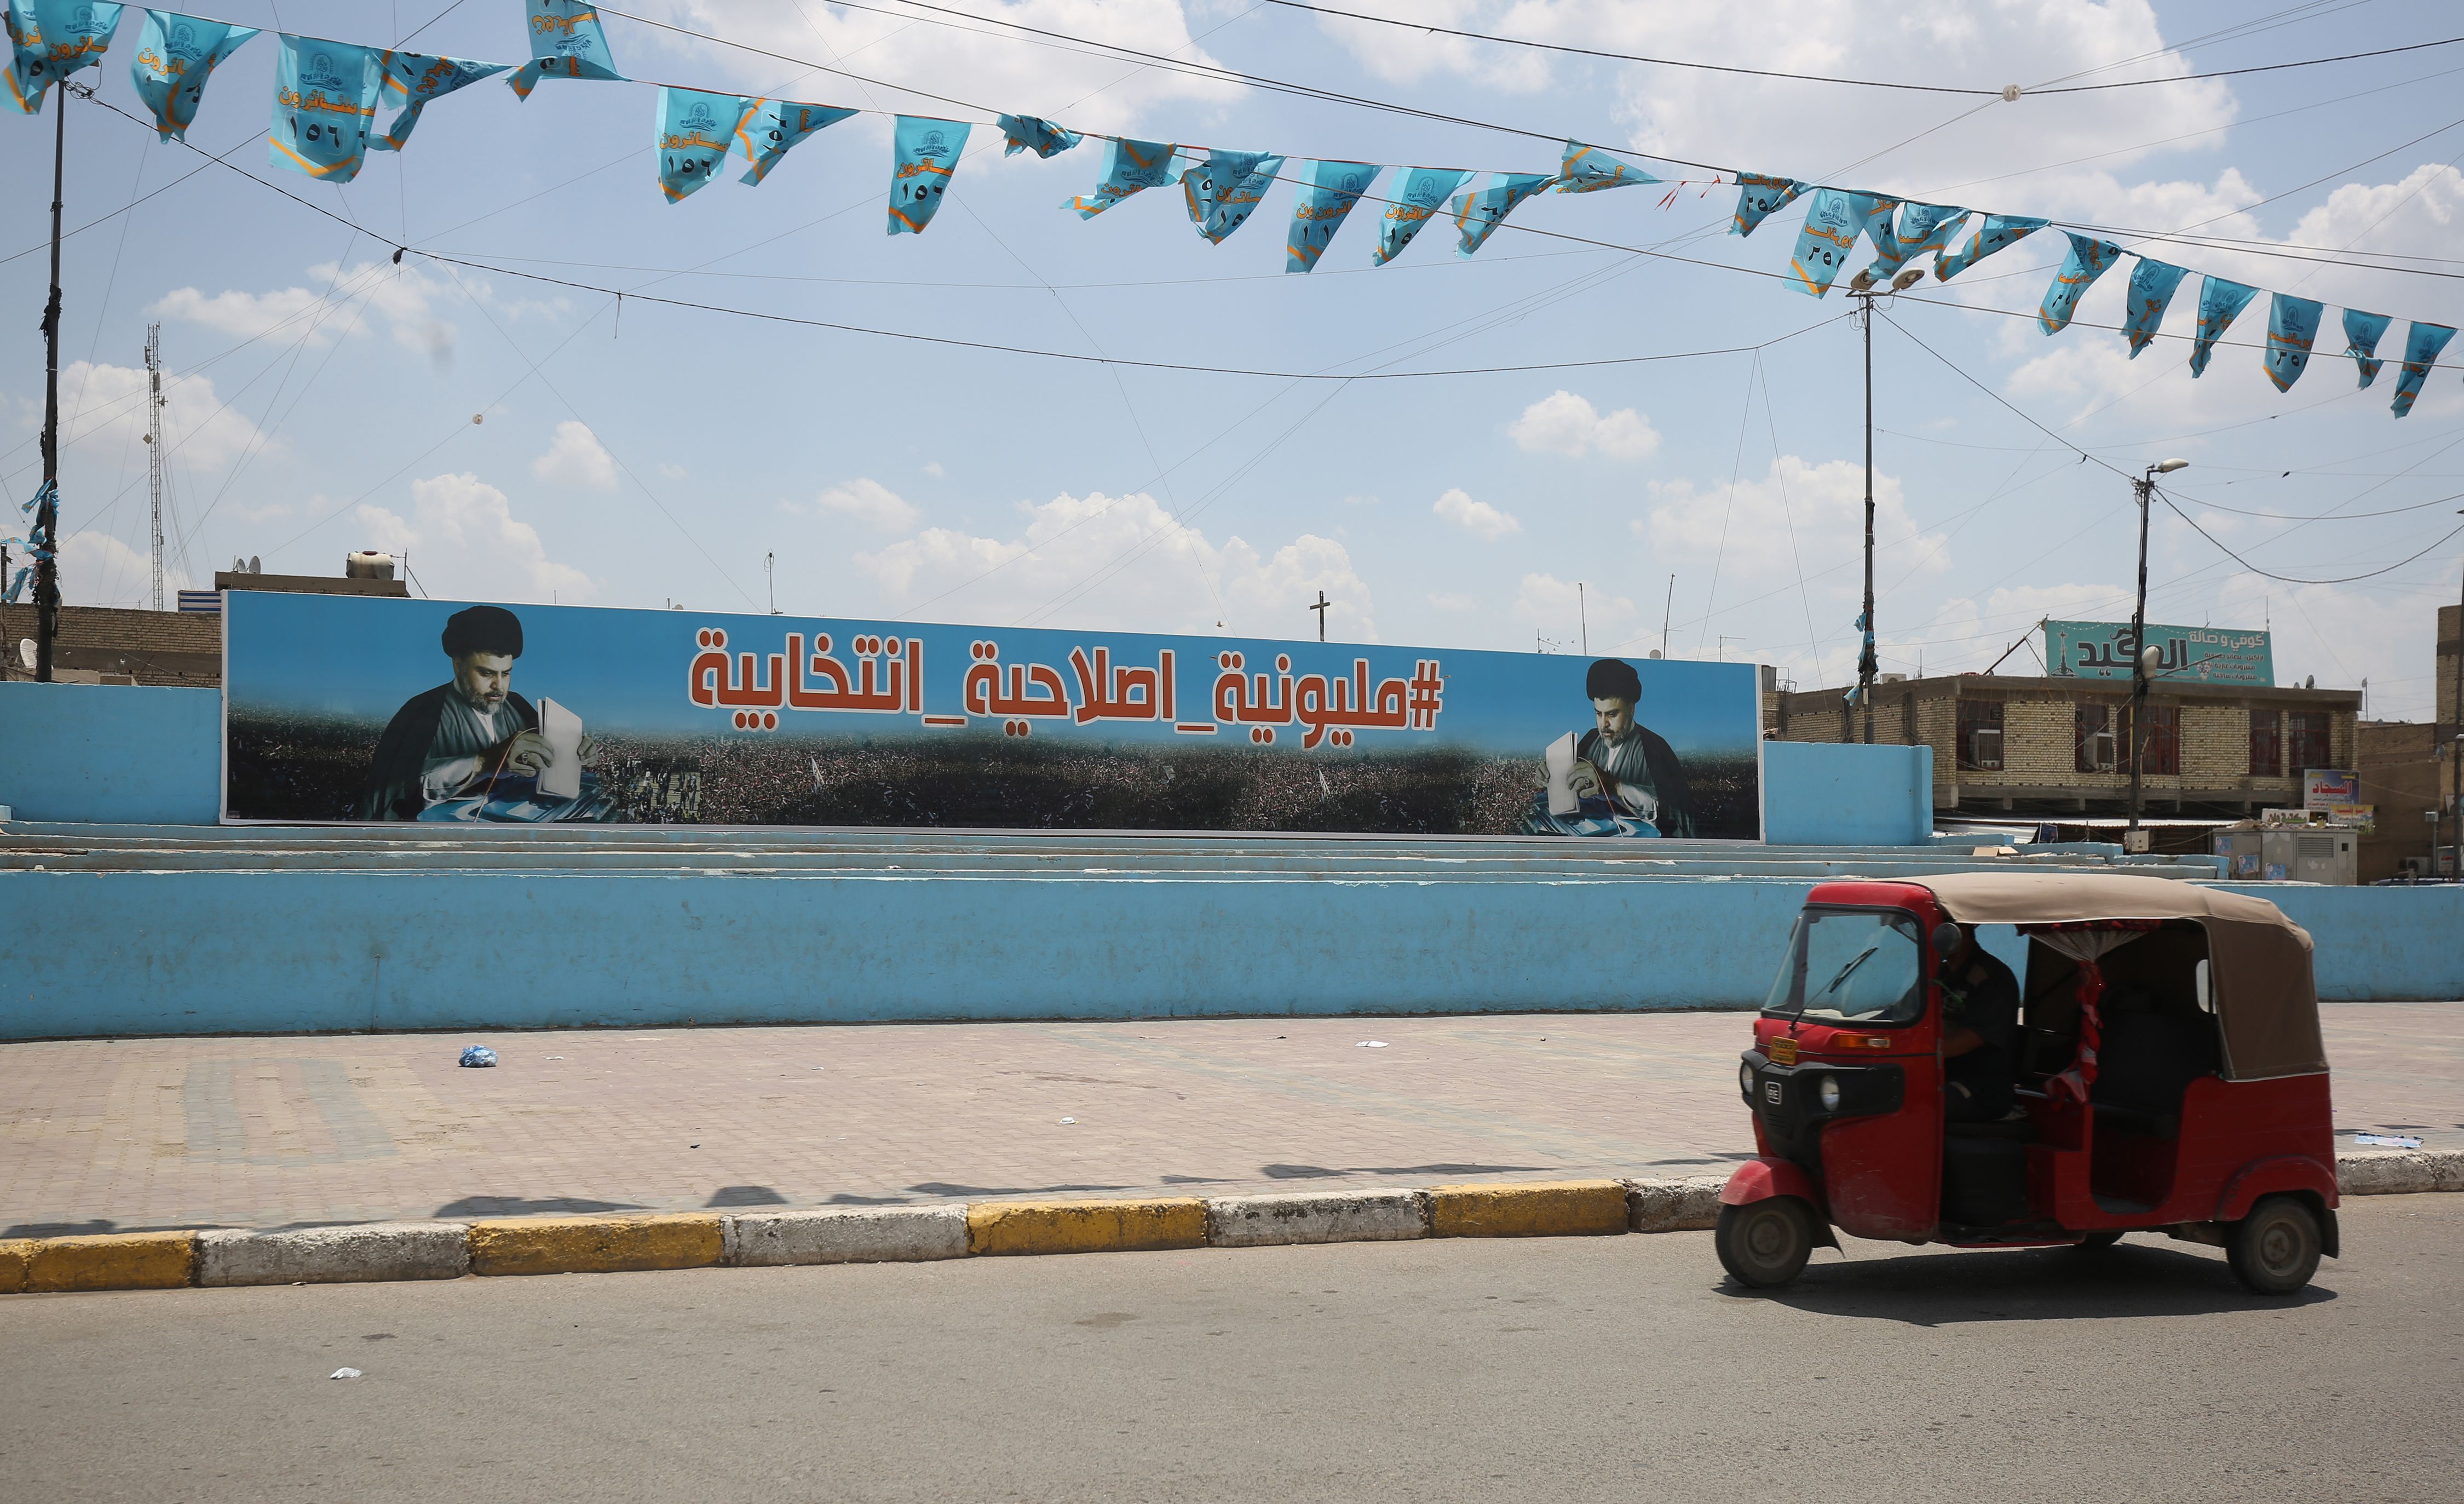 A small vehicle drives past a poster of Shiite leader Muqtada al-Sadr in Sadr City, east of the Iraqi capital Baghdad on May 14, 2018. (AHMAD AL-RUBAYE—AFP/Getty Images)